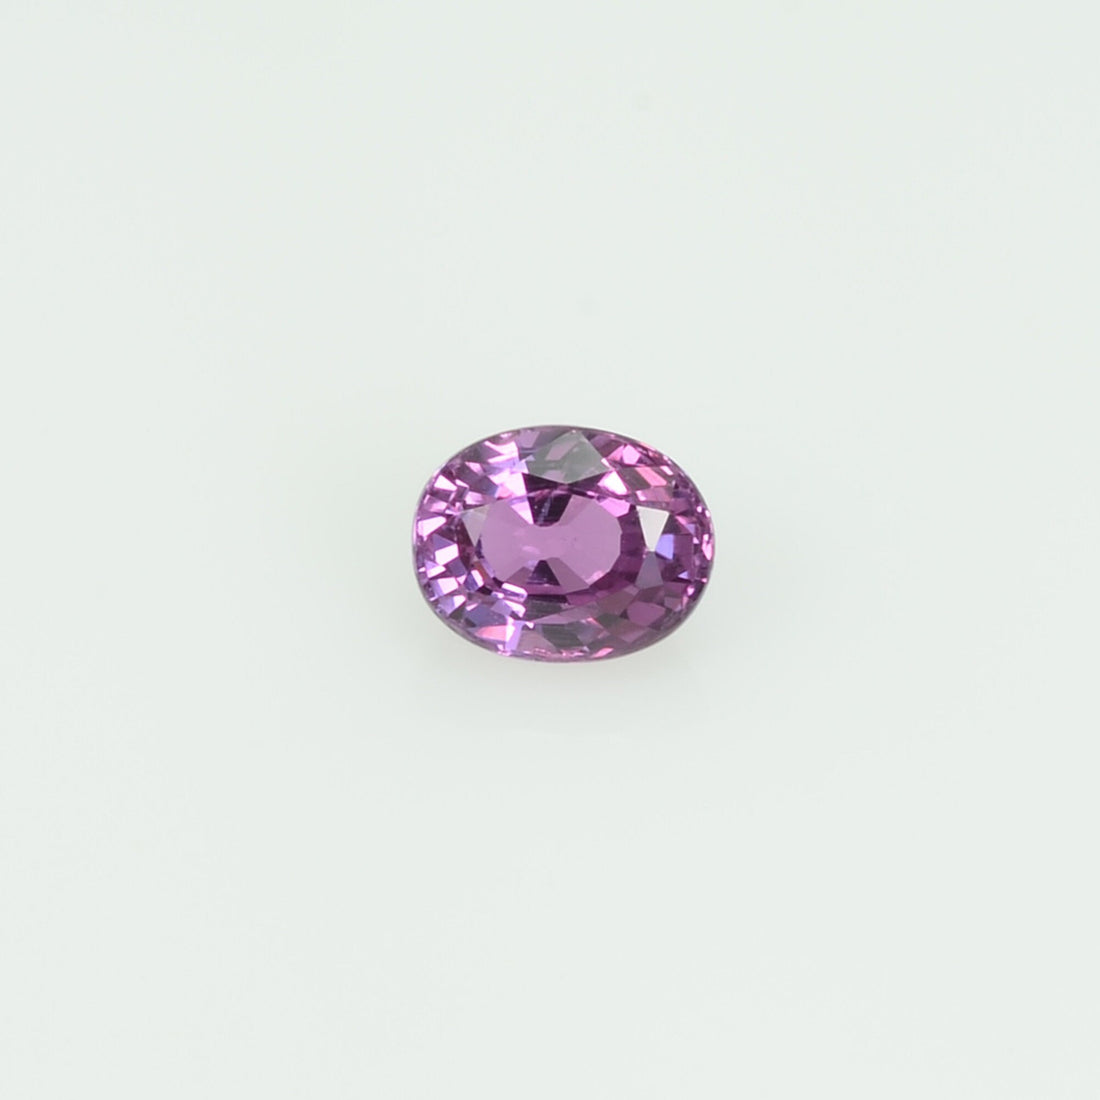 0.56 Cts Natural Thai Ruby Loose Gemstone Oval Cut